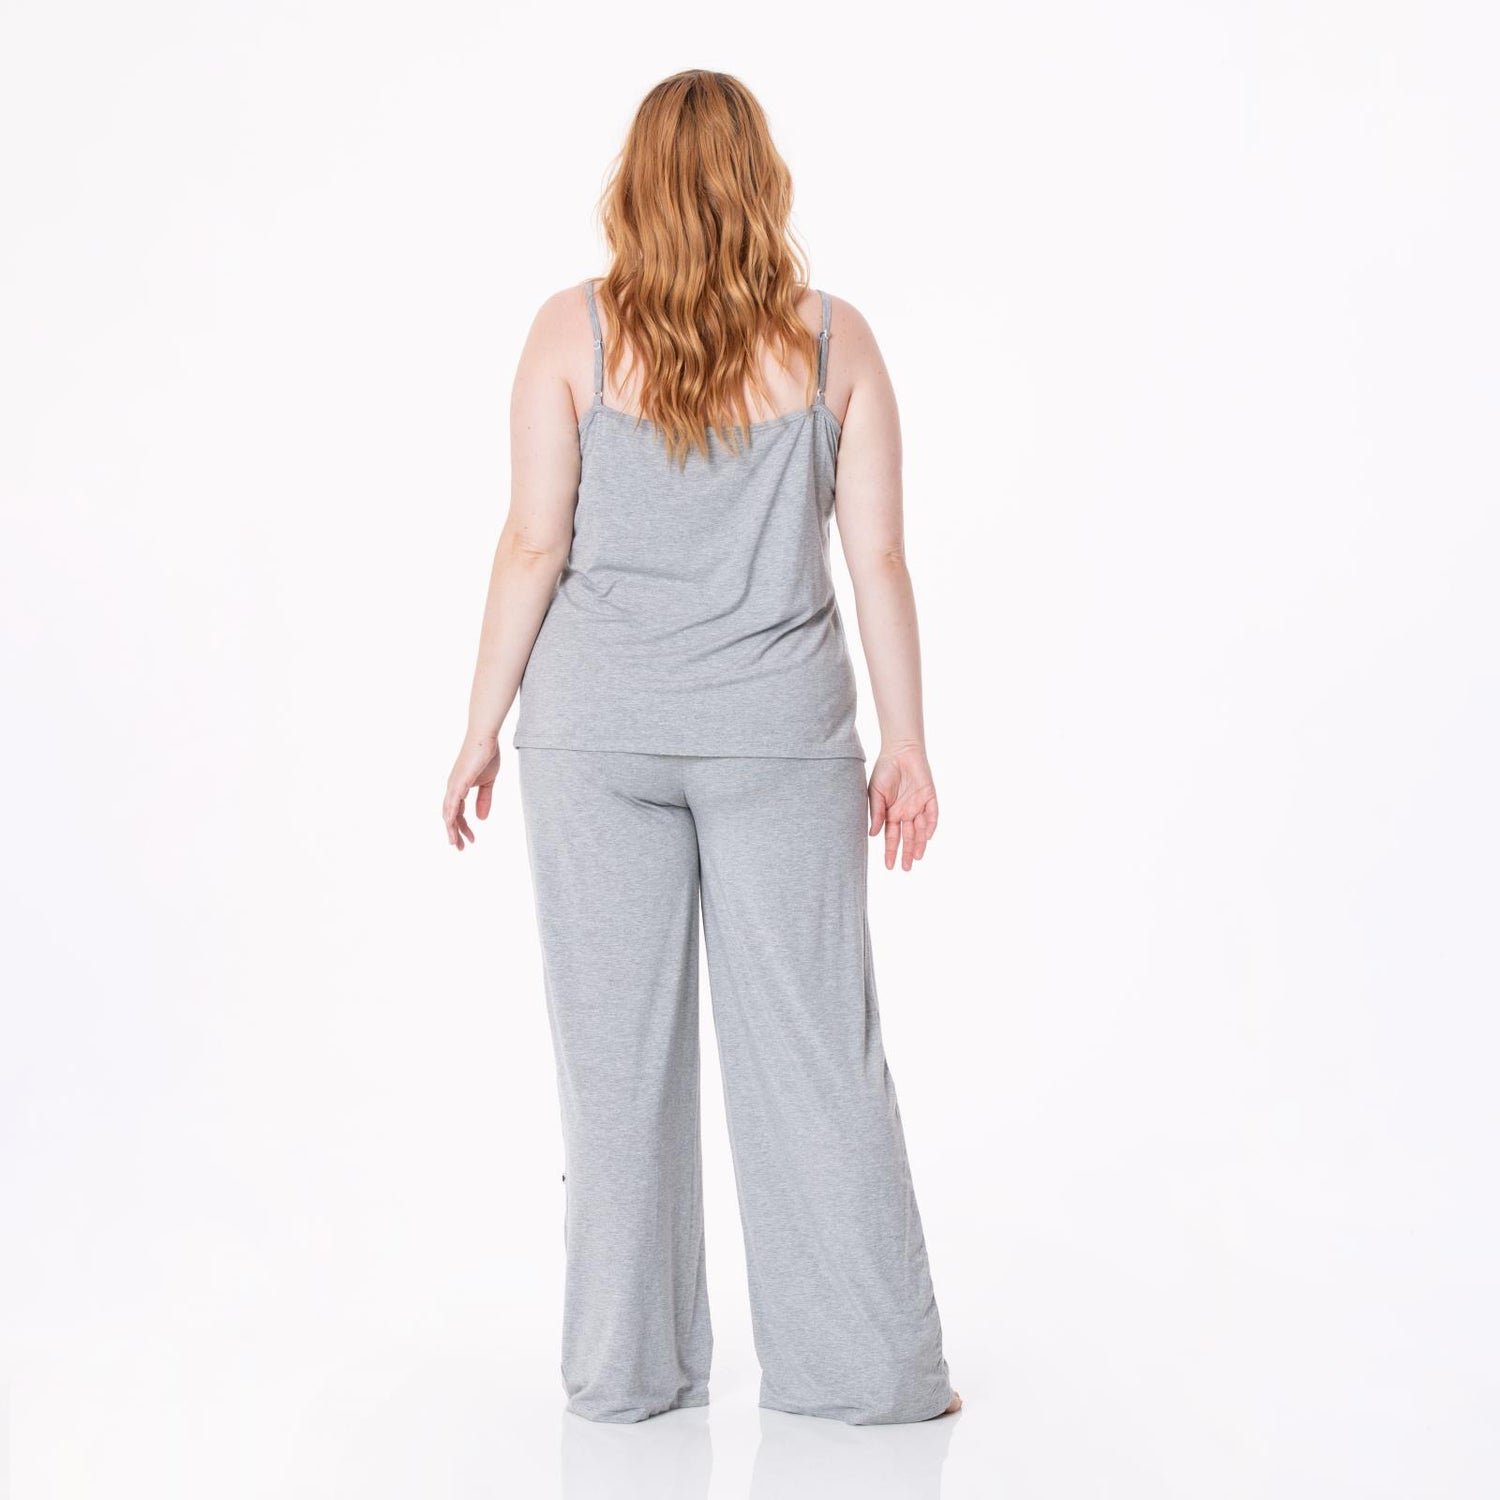 Women's Cami and Lounge Pants Pajama Set in Heathered Mist